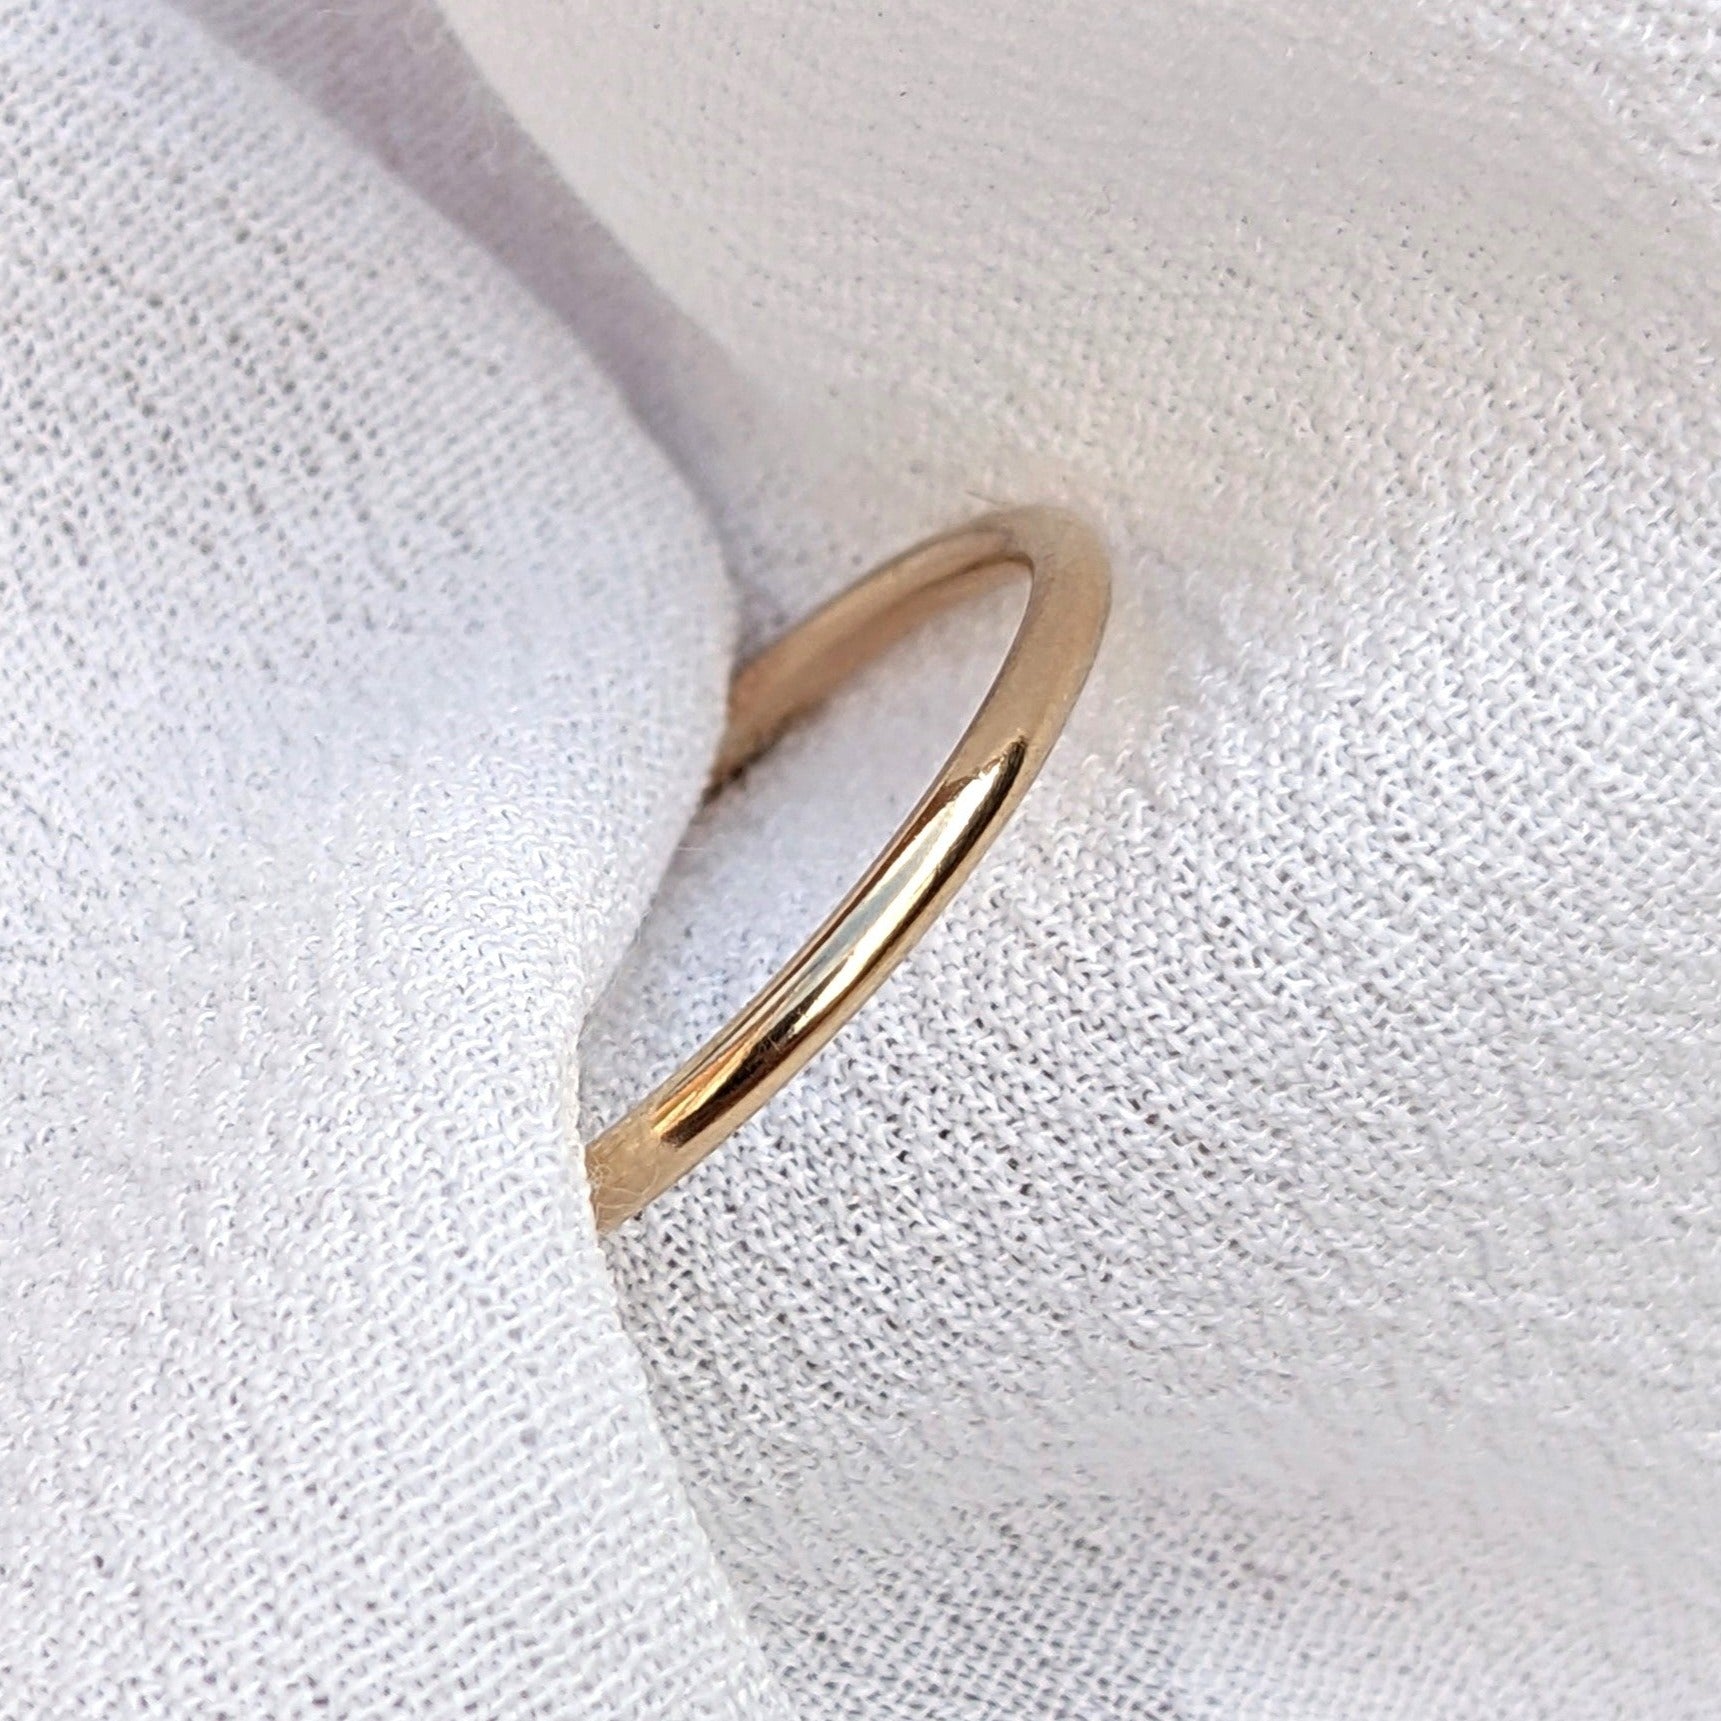 Slim gold filled ring in white fabric